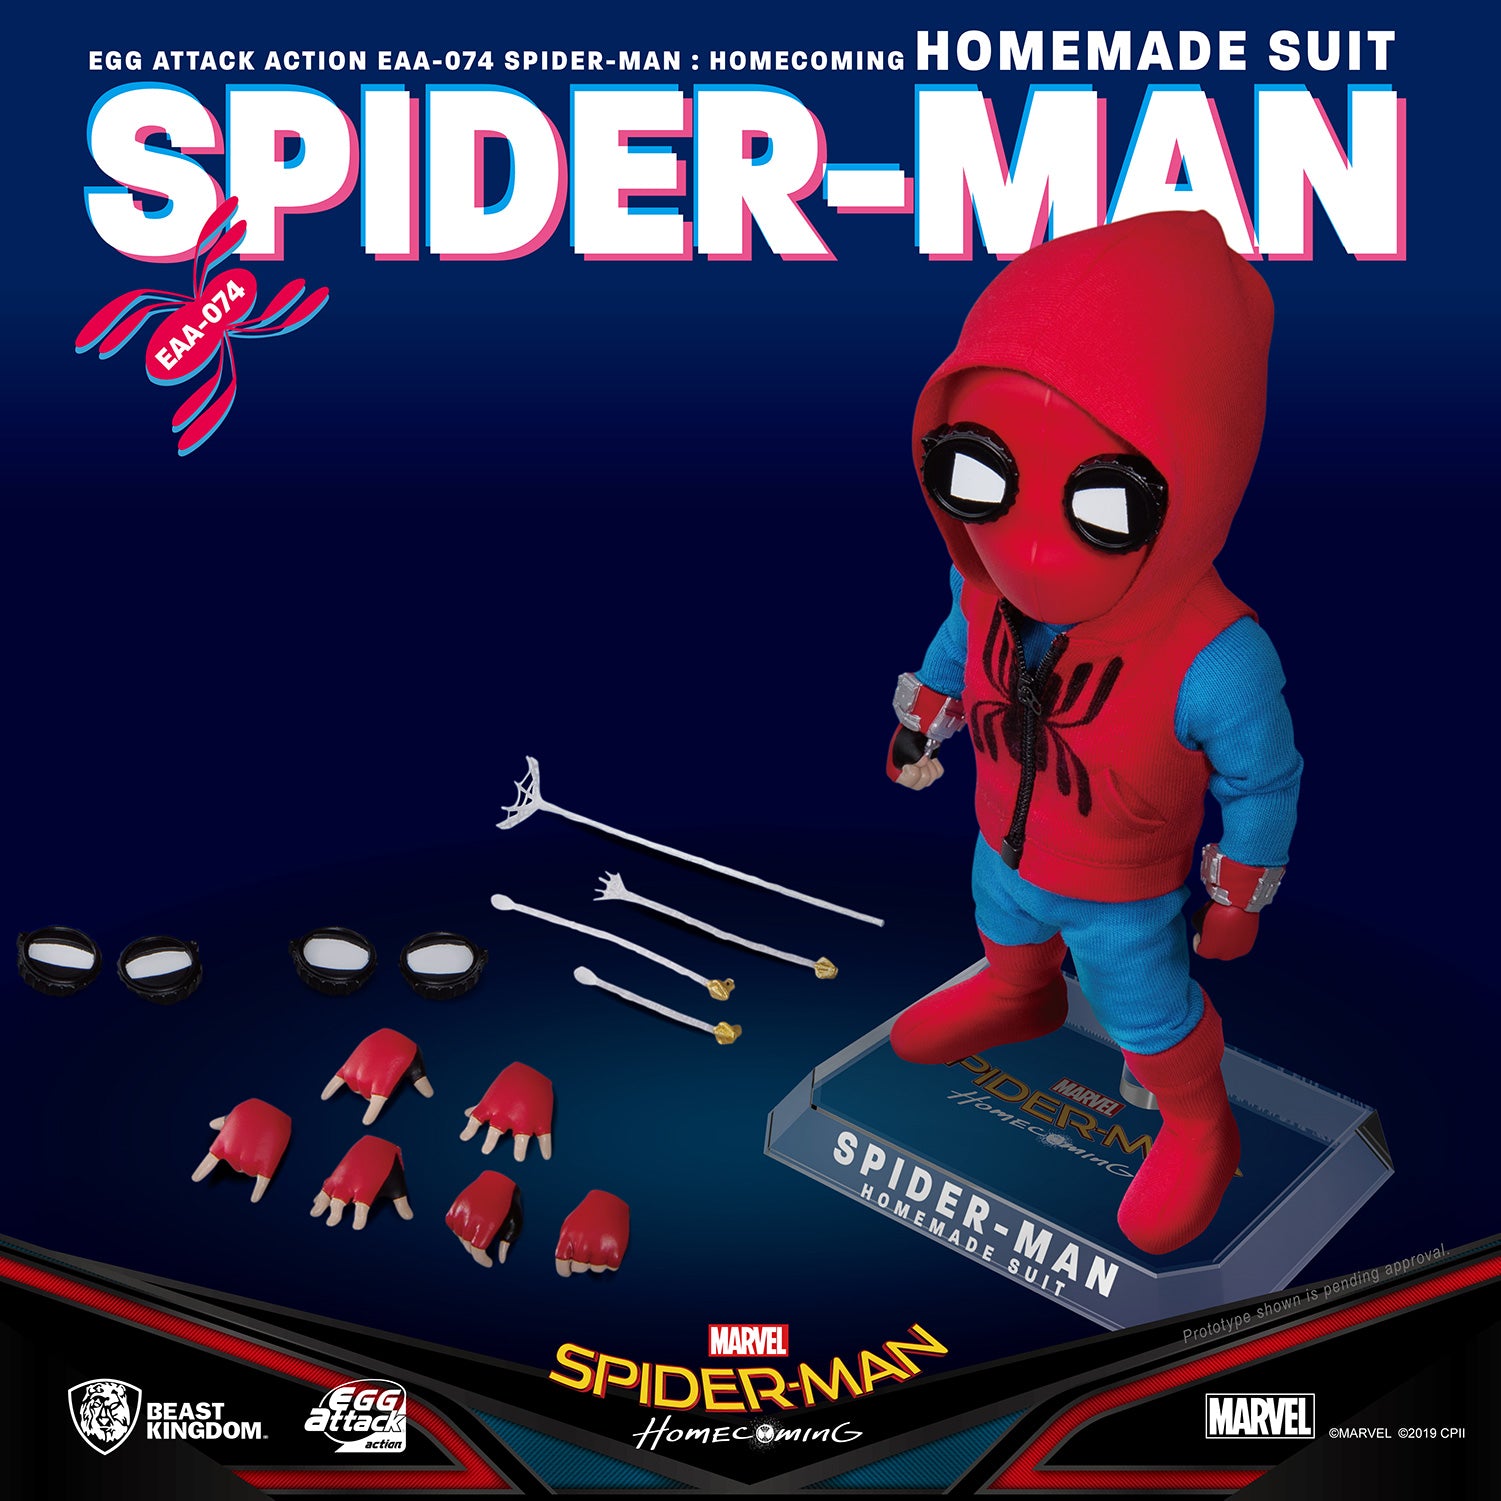 Beast Kingdom EAA-074 Marvel Comics: Spider-Man Homecoming (Homemade Suit) Egg Attack Action Figure